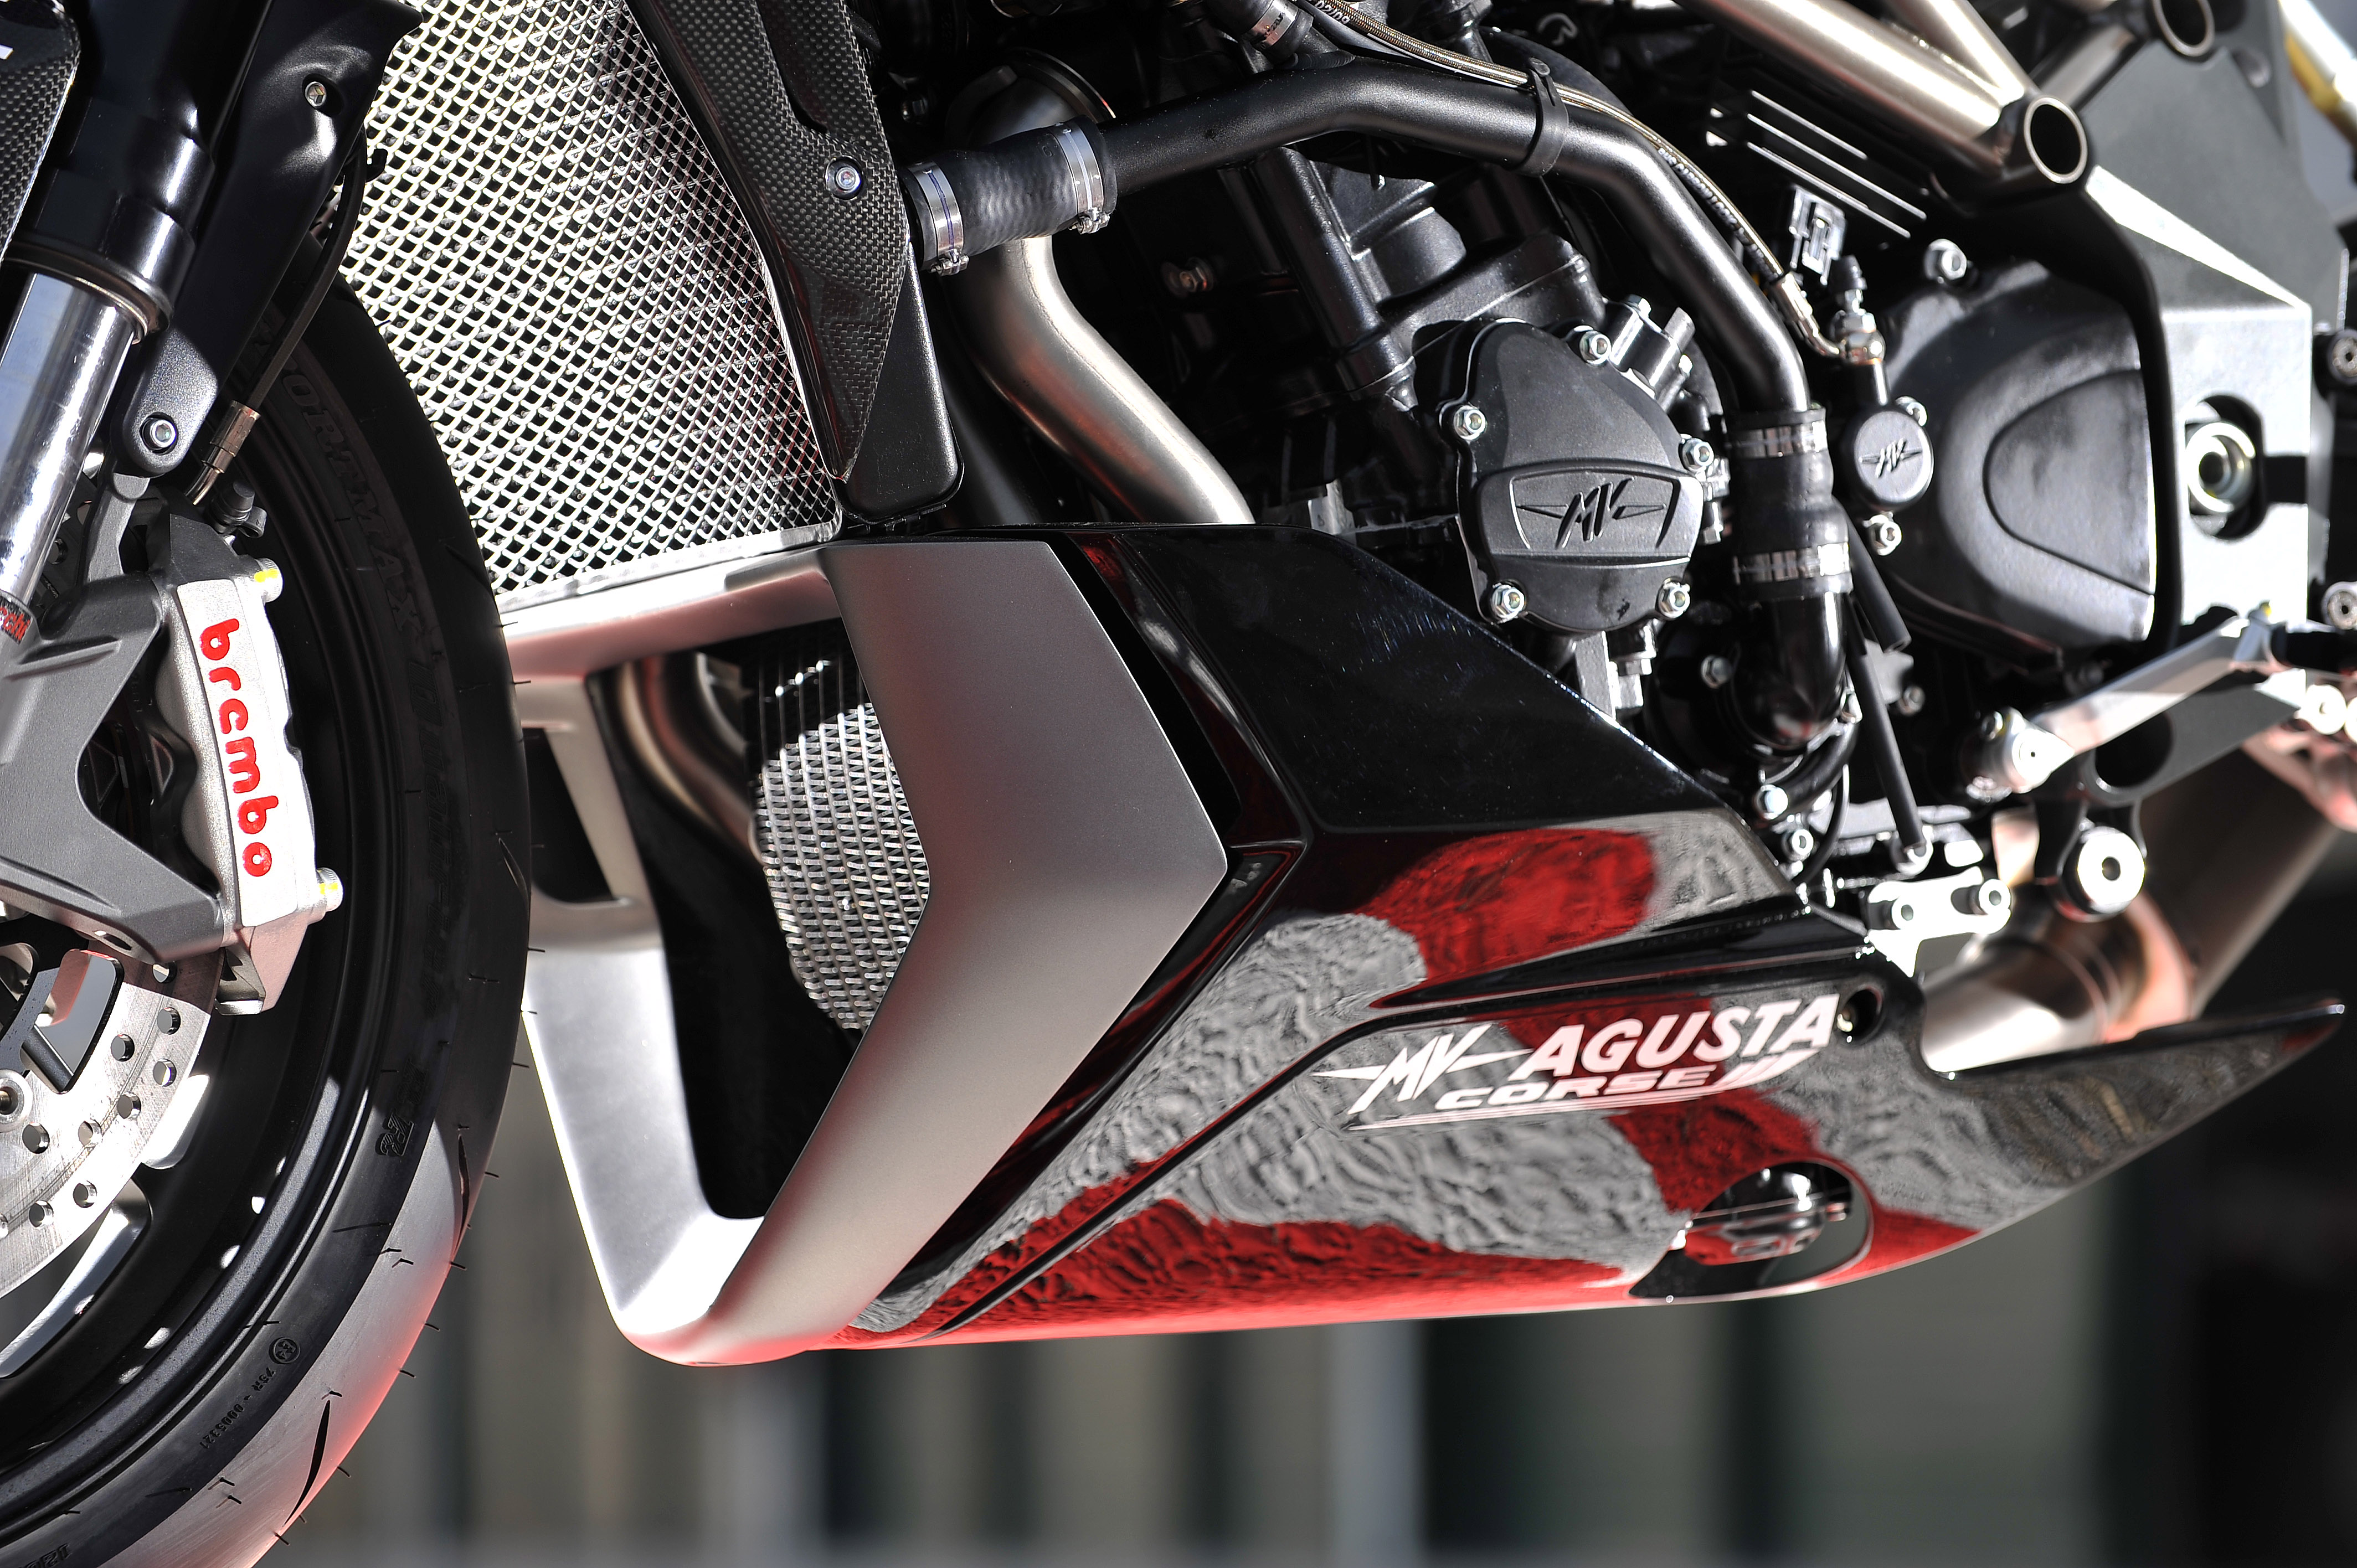 MV Agusta Brutale 1090RR Special - Gallery